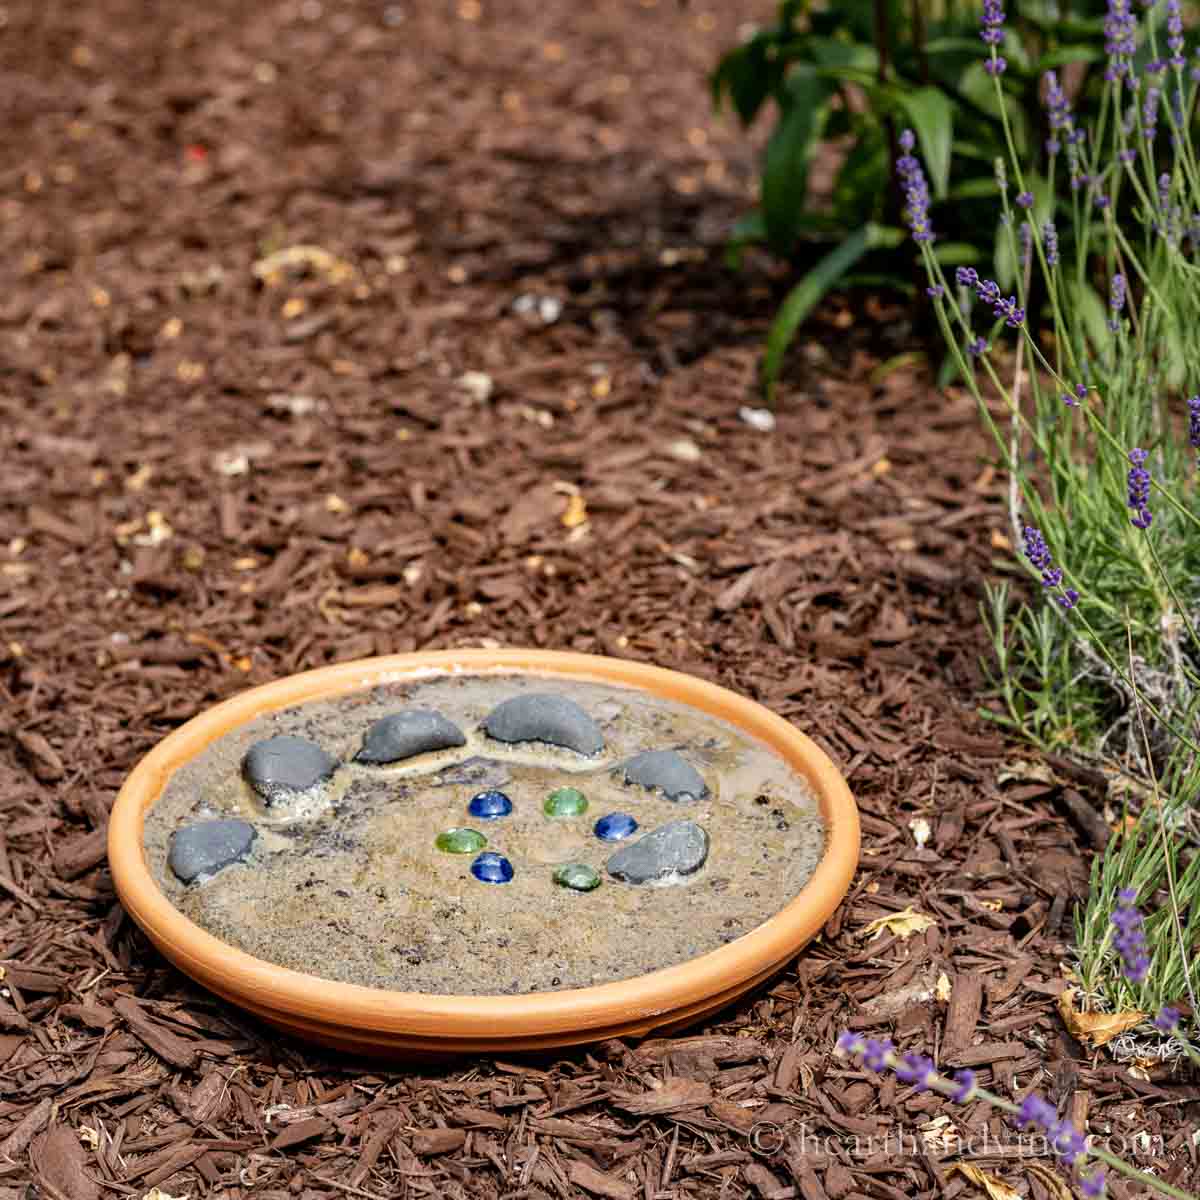 Clay pot sauce with sand, rocks and water in the garden next to lavender.